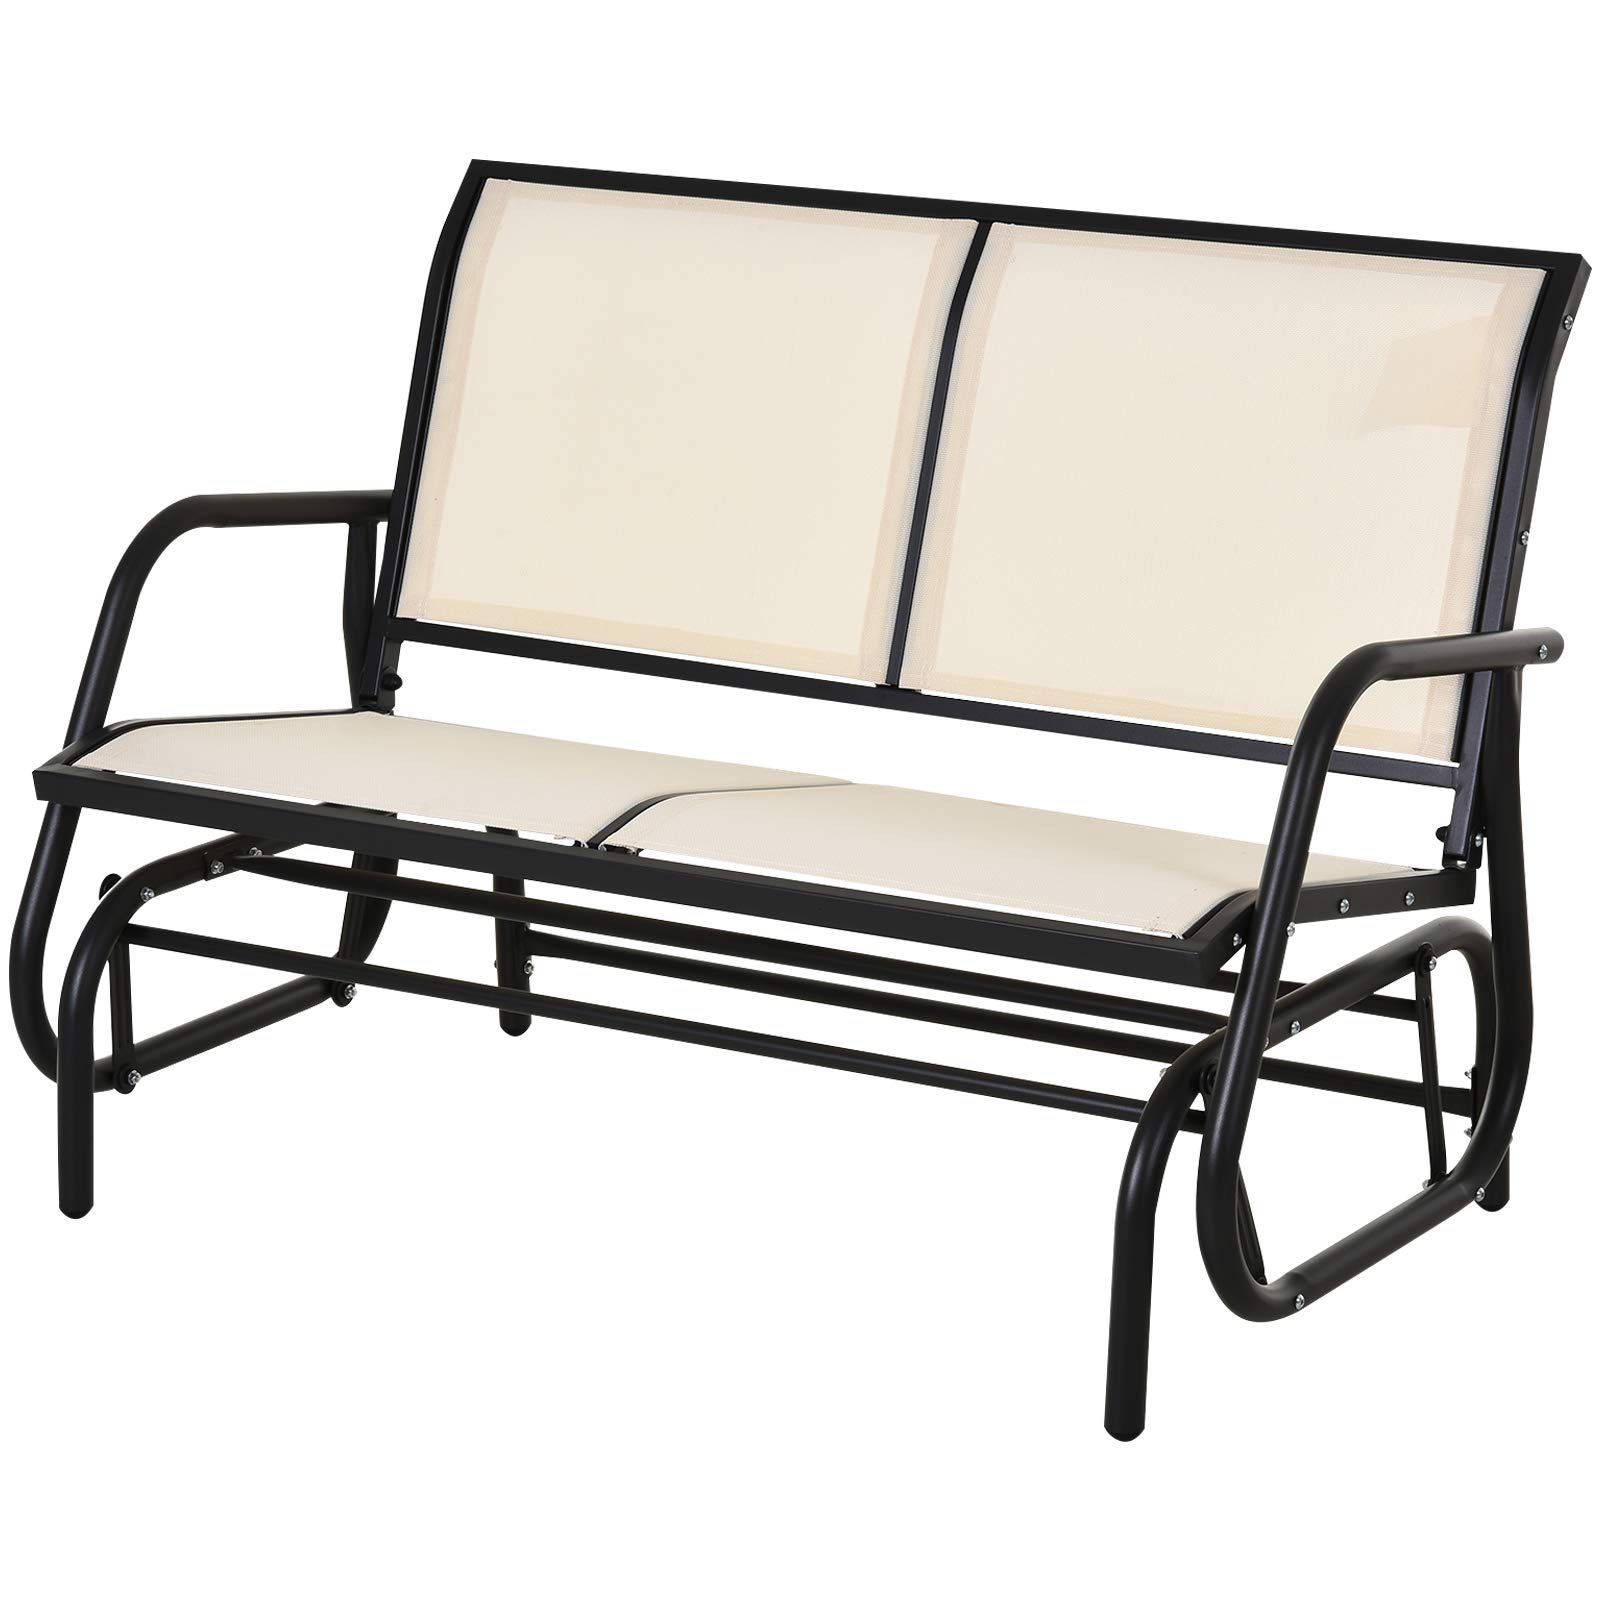 🎉 BRAND NEW Outsunny Outdoor Double Rocking Chäir with a Comfortable Sling Fabric Backing, Steel Frame, Curved Rocking Arms, Beige